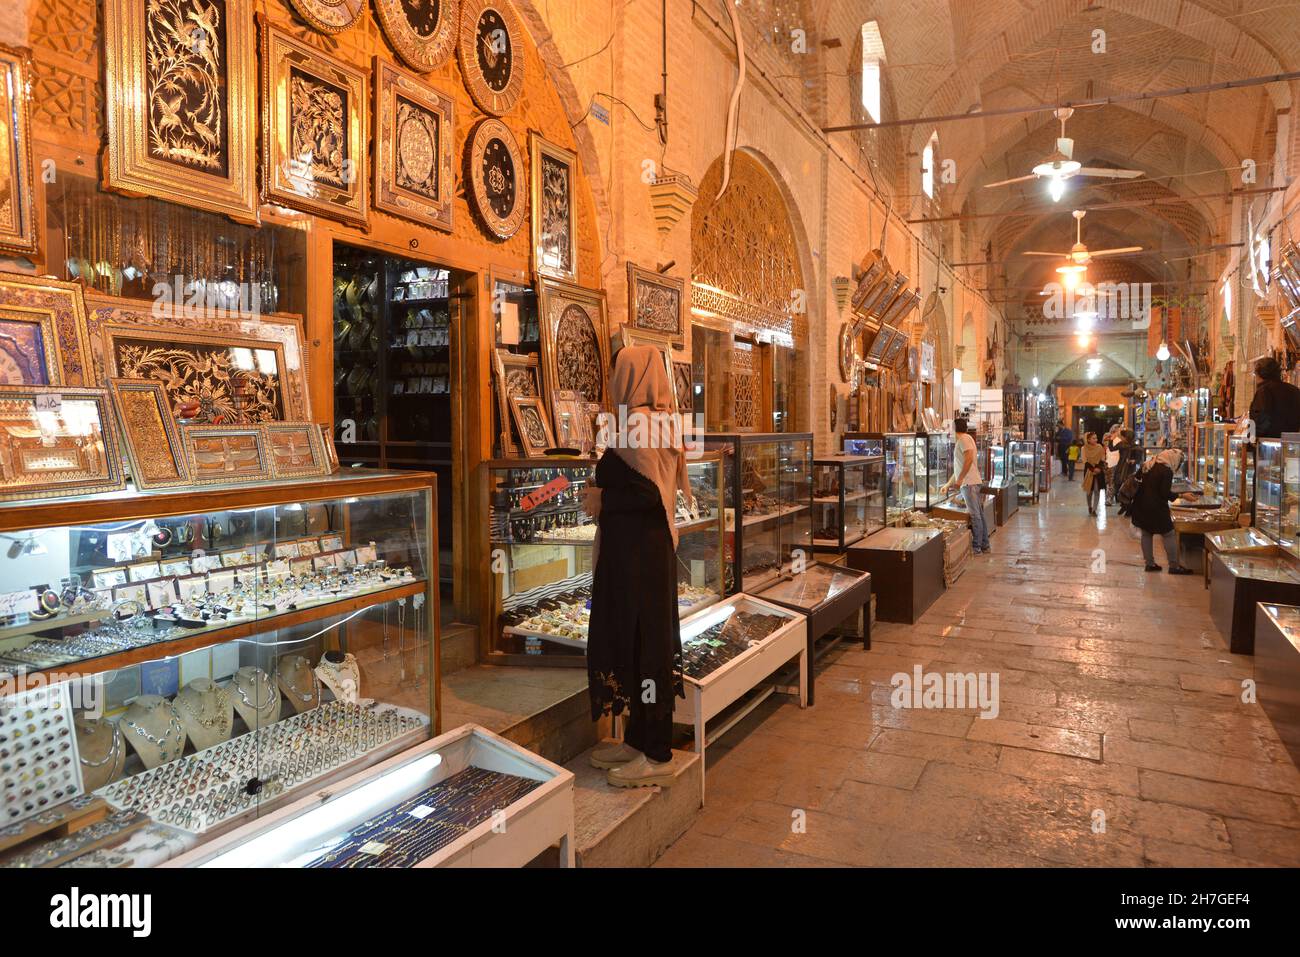 IRAN. SHIRAZ. THE GREAT BAZAAR OF VAKIL WAS FIRST BUILT DURING THE XITH CENTURY. IT HAS NUMEROUS ALLEYS SPECIALIZED IN JEWELRY, RUGS, SPICES, CLOTHES. Stock Photo